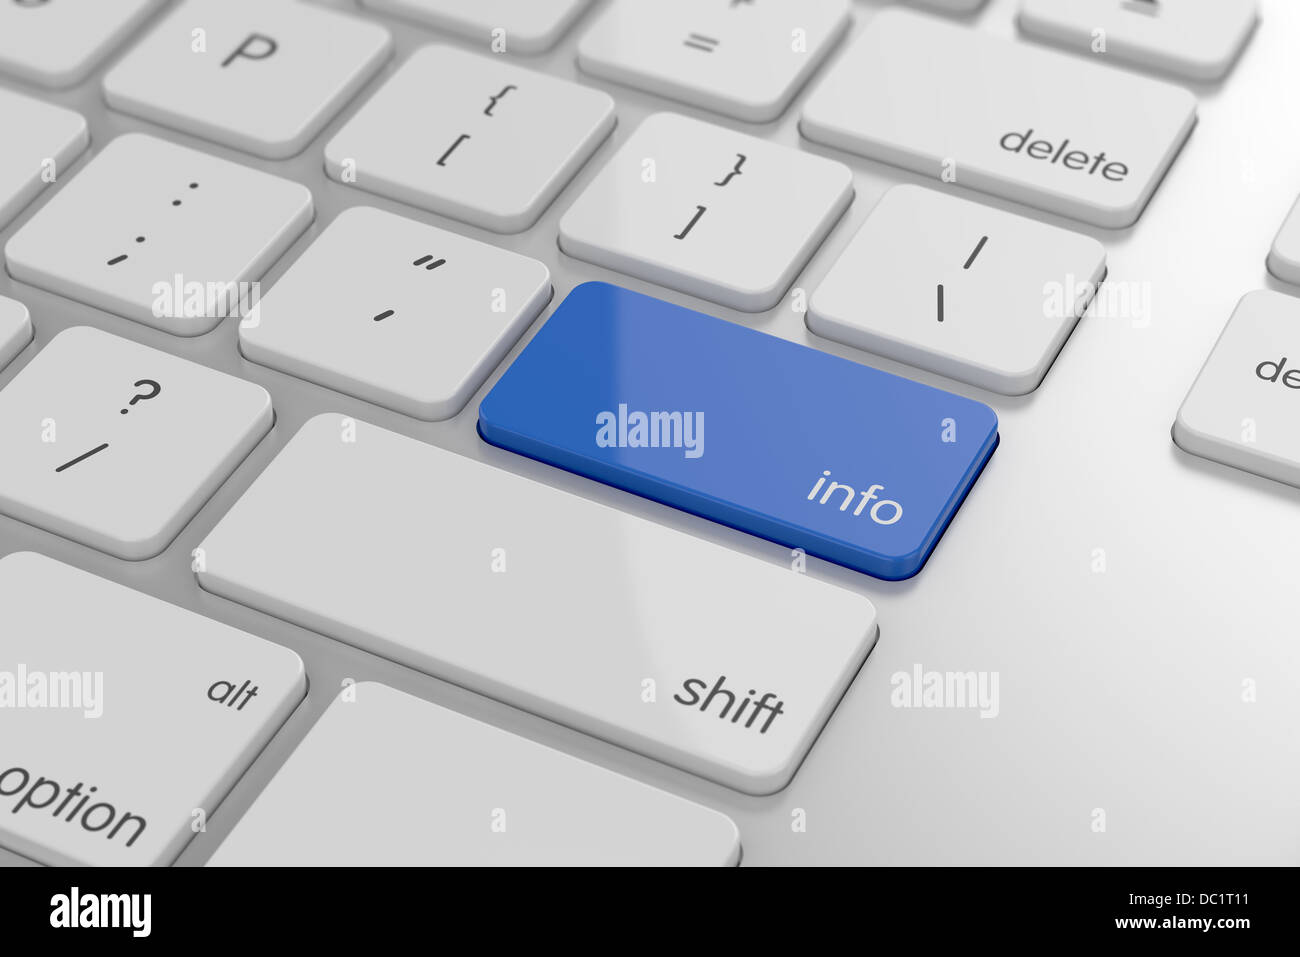 Info button on keyboard with soft focus Stock Photo